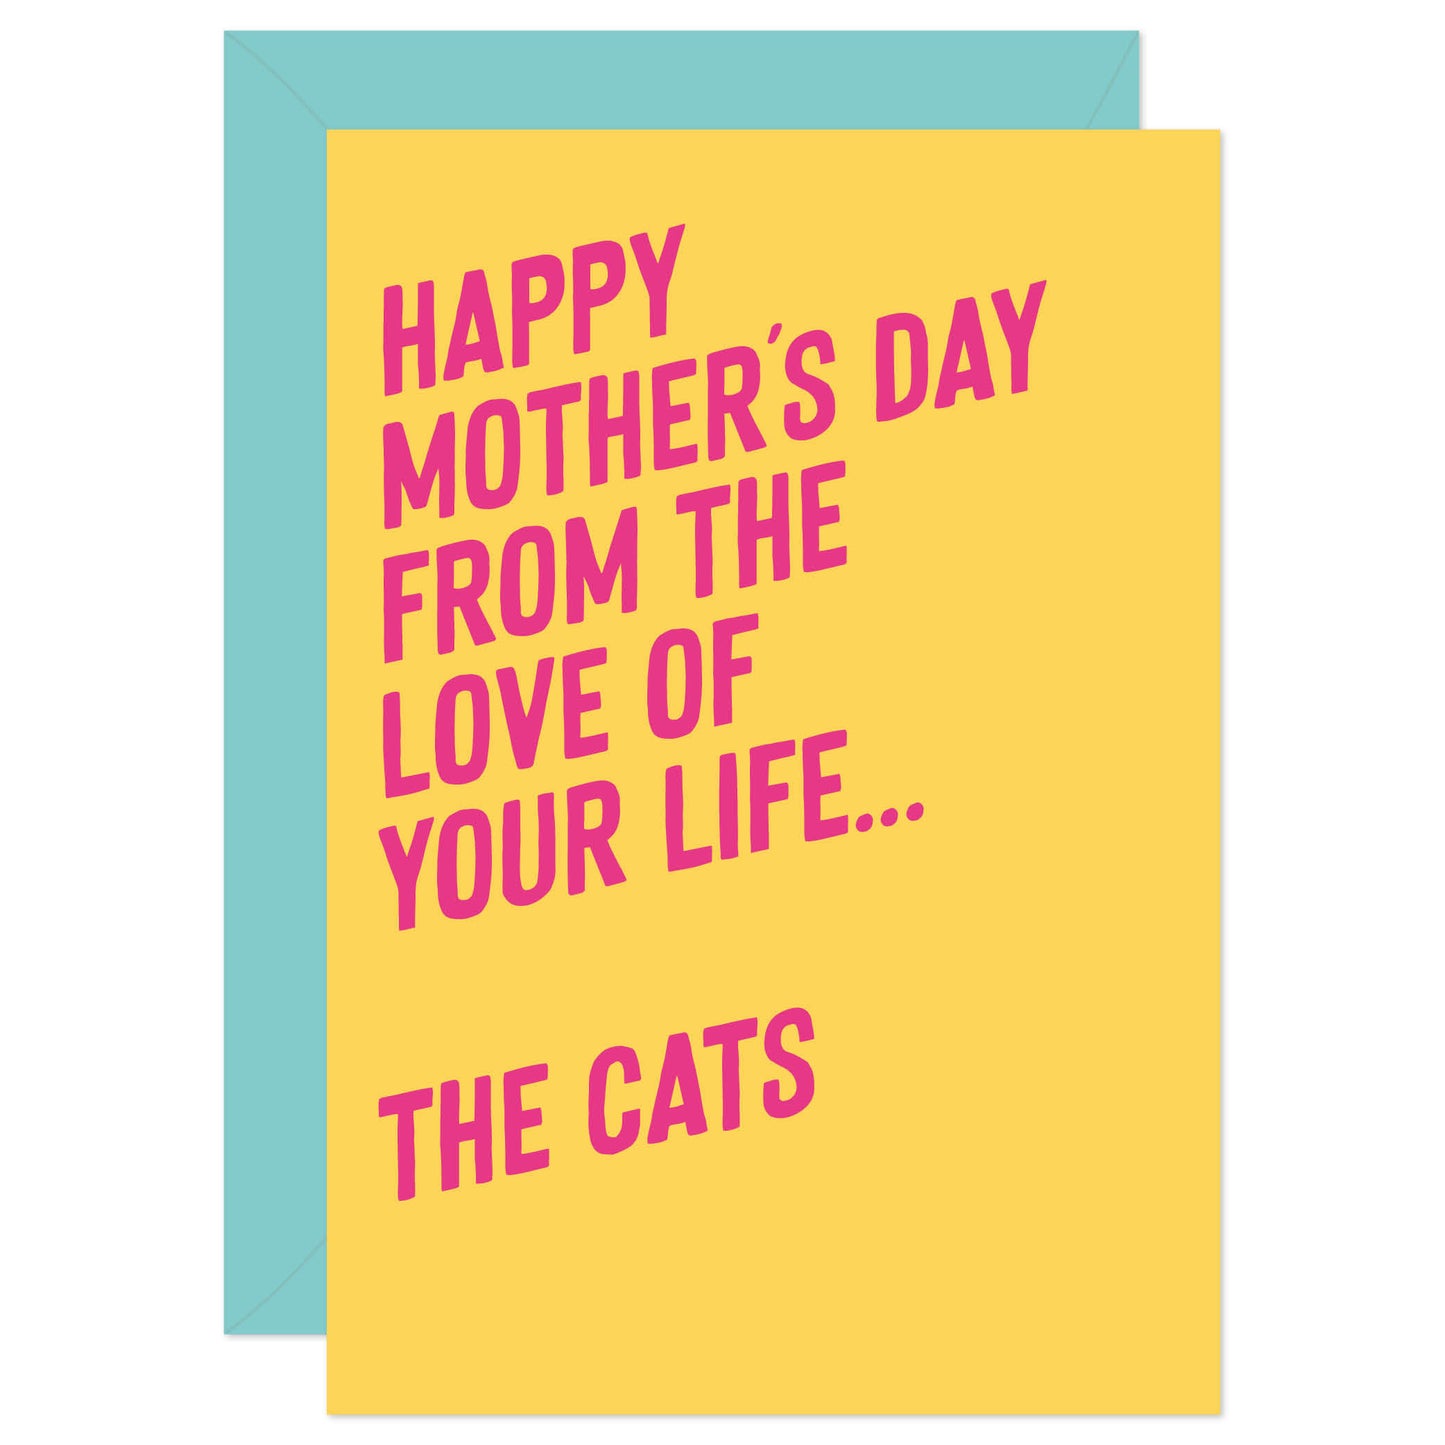 From the cats Mother's Day card from Purple Tree Designs